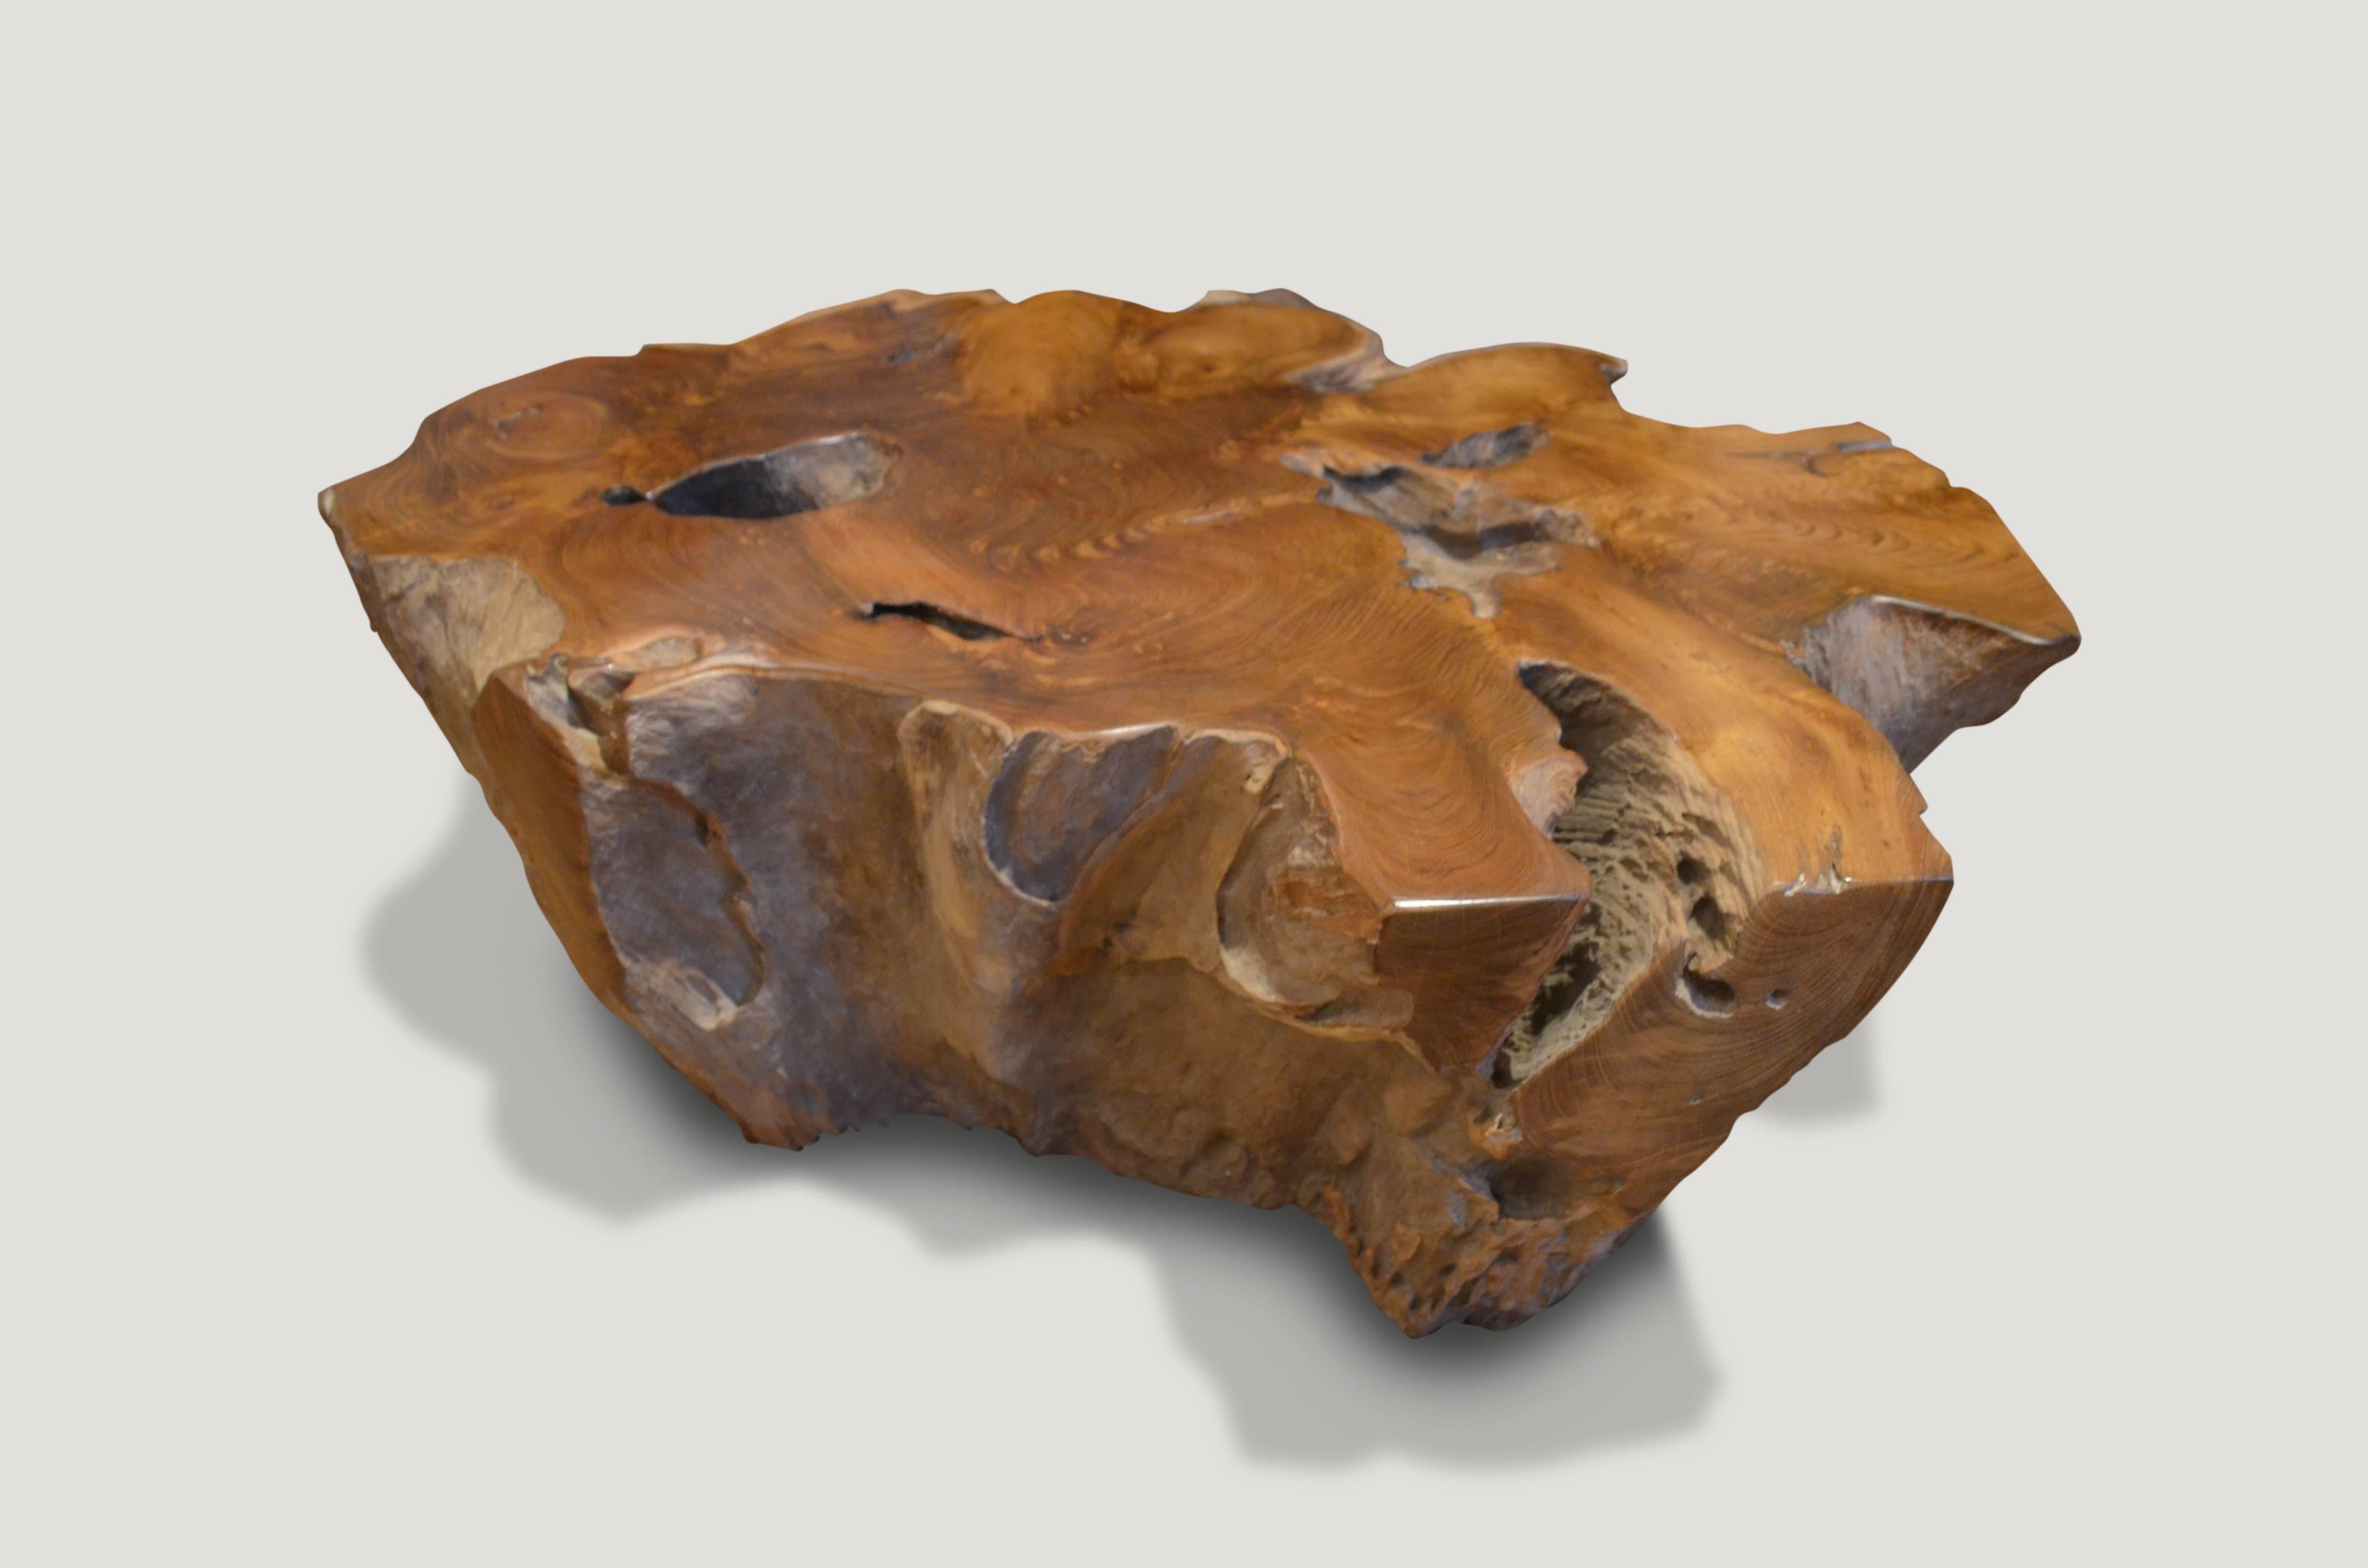 Reclaimed teak wood single root coffee table or side table. We have polished the top to enhance the wood grain and left the sides raw in contrast.

Andrianna Shamaris, Inc. The Leader In Modern Organic Design